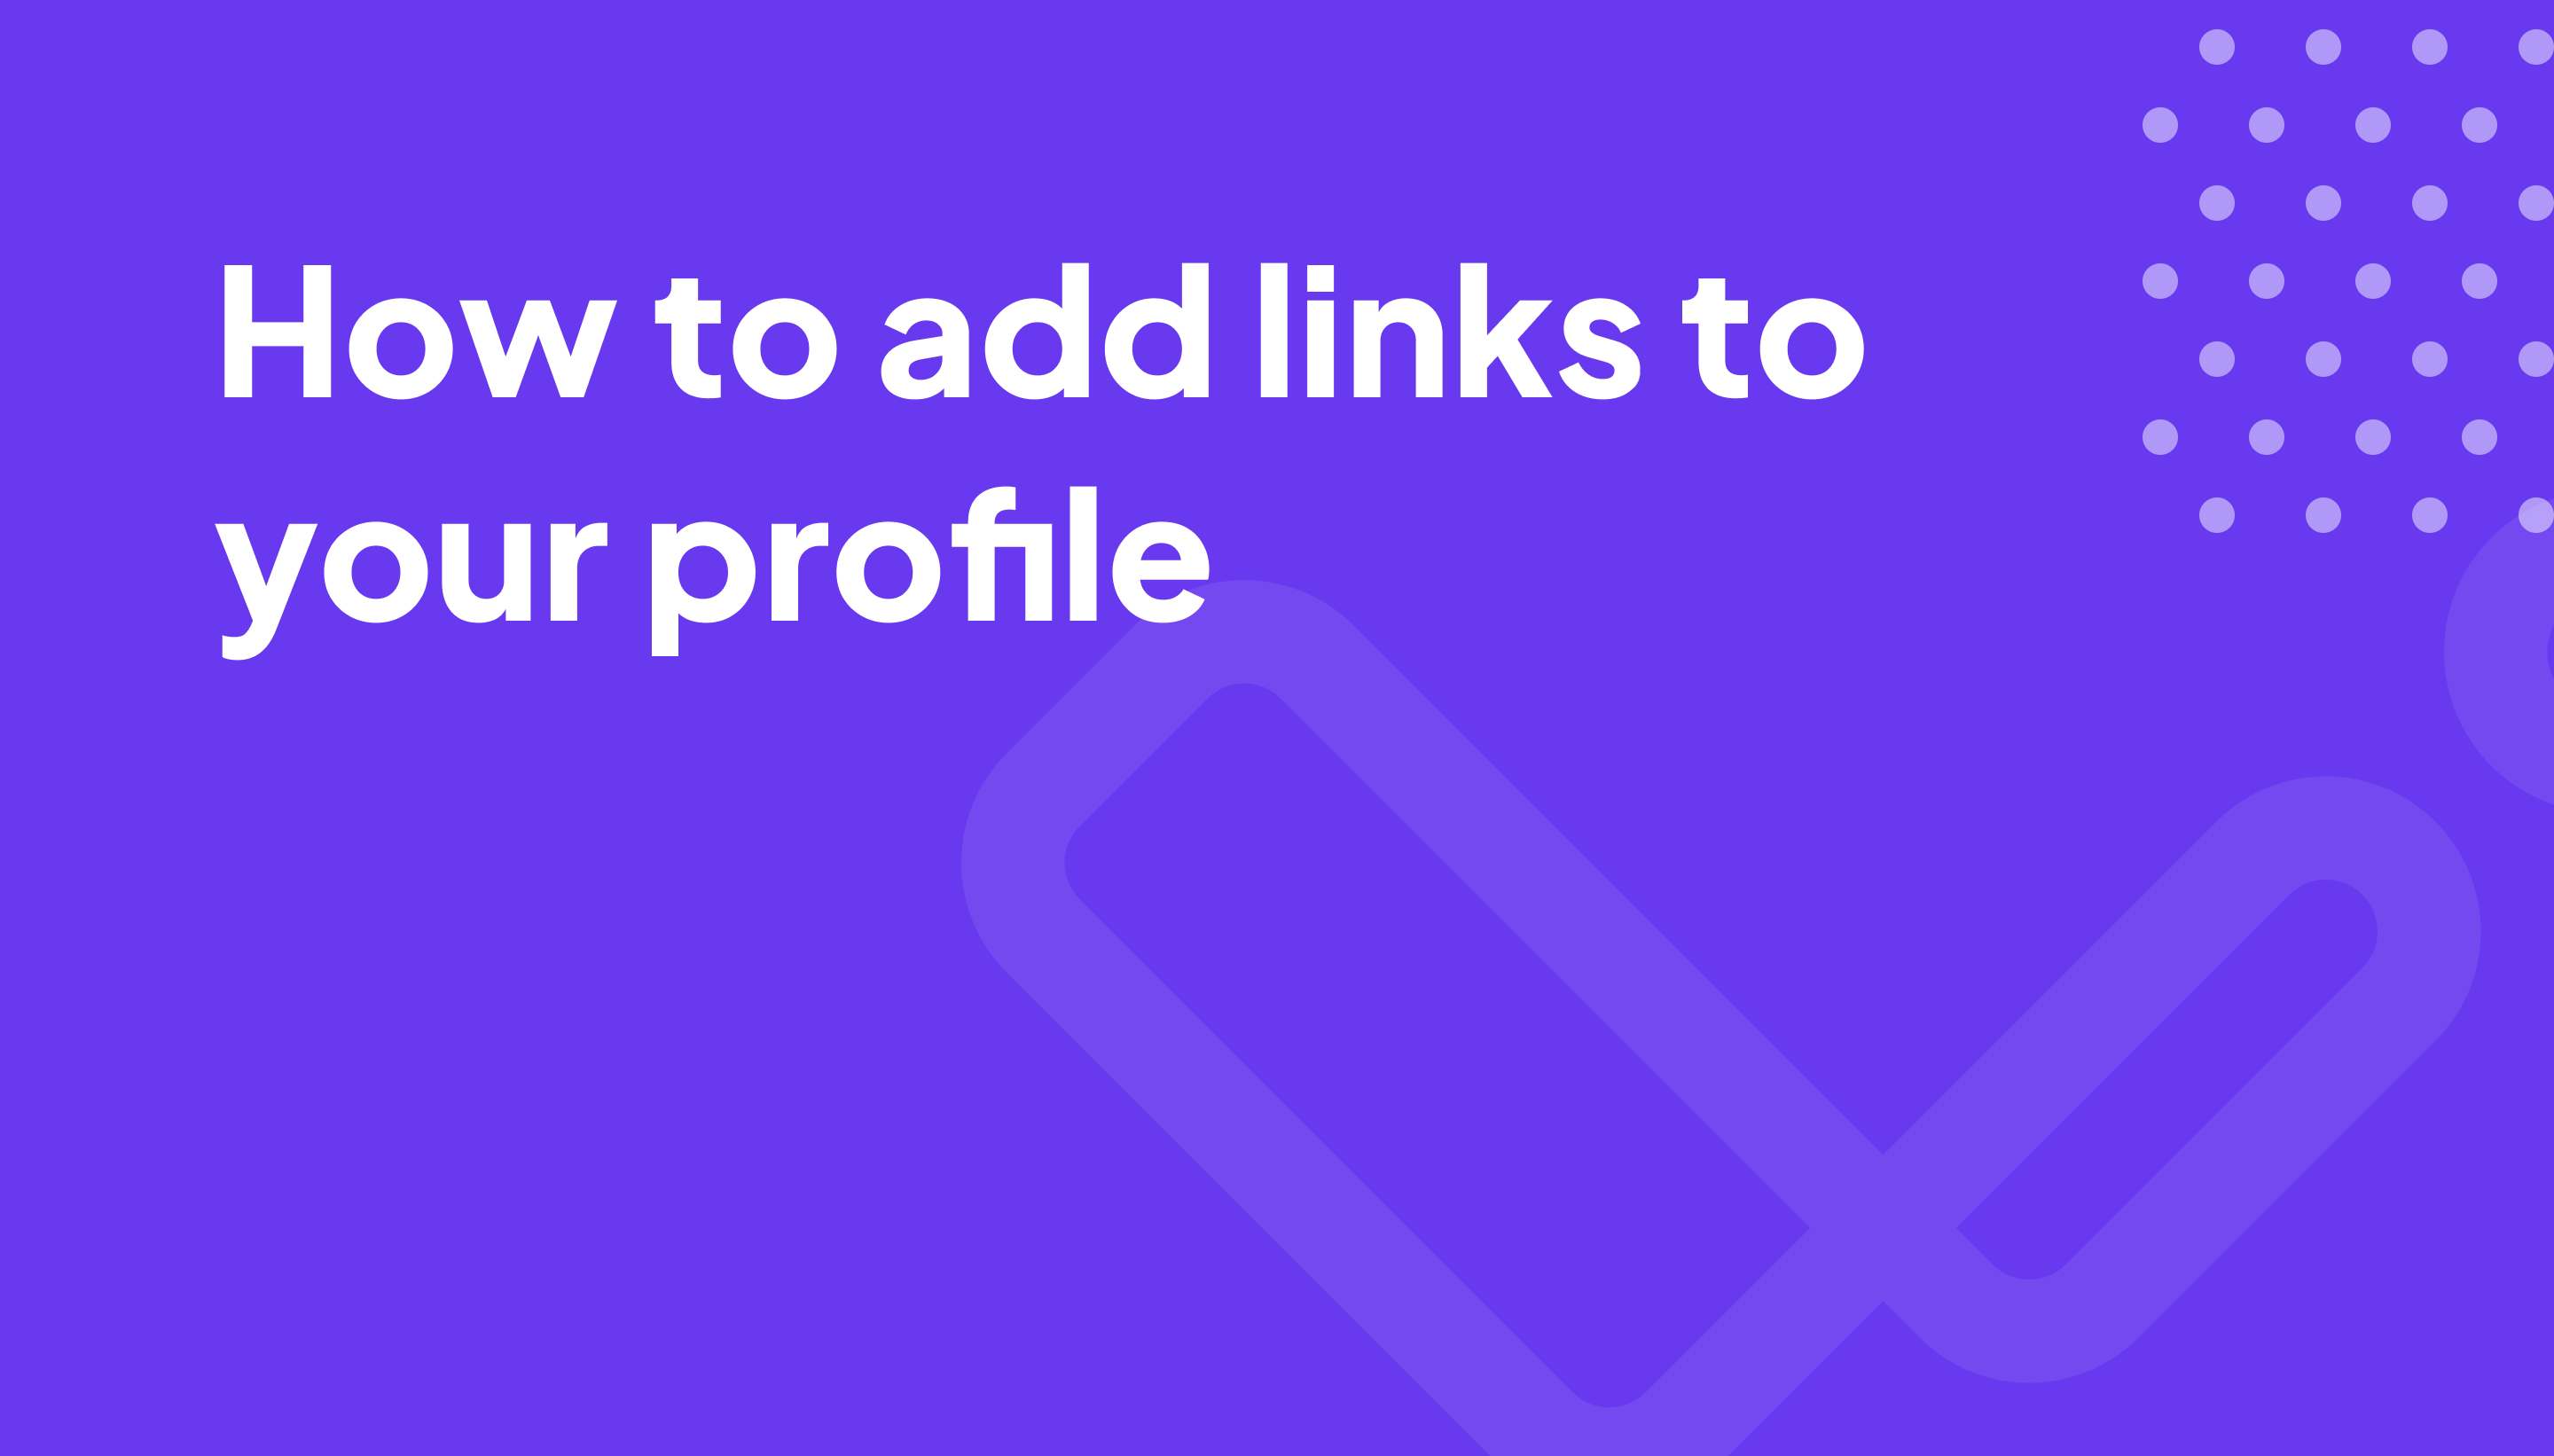 How to add links to your profile